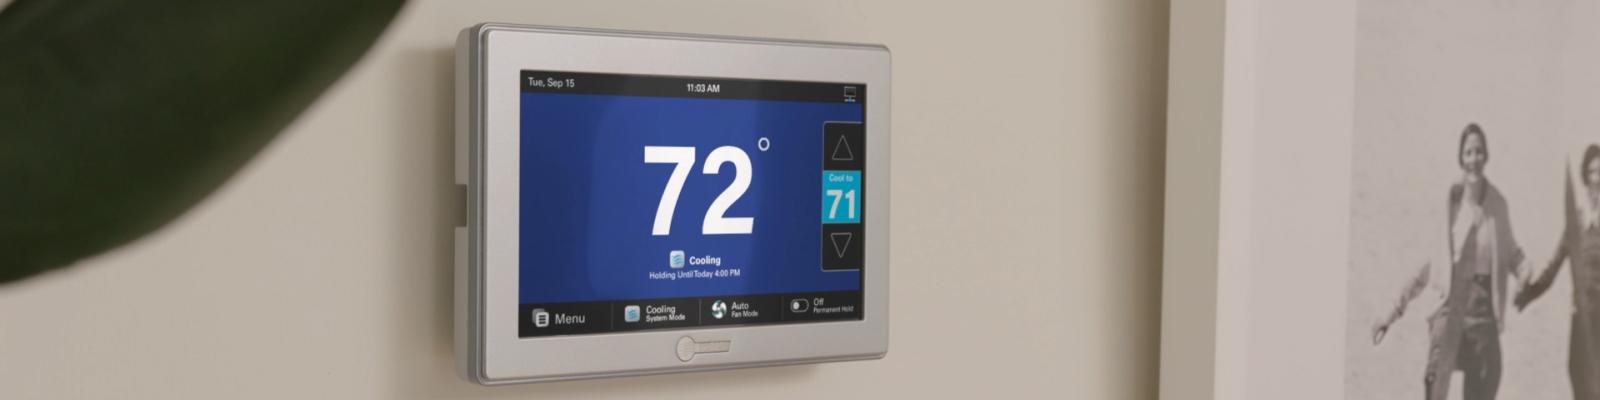 https://www.trane.com/_next/image/?url=https%3A%2F%2Flive-trane-headless-cms.pantheonsite.io%2Fwp-content%2Fuploads%2F2018%2F05%2Fchoosing-the-right-smart-thermostat-for-your-home-1600x400-1.jpg&w=3840&q=75